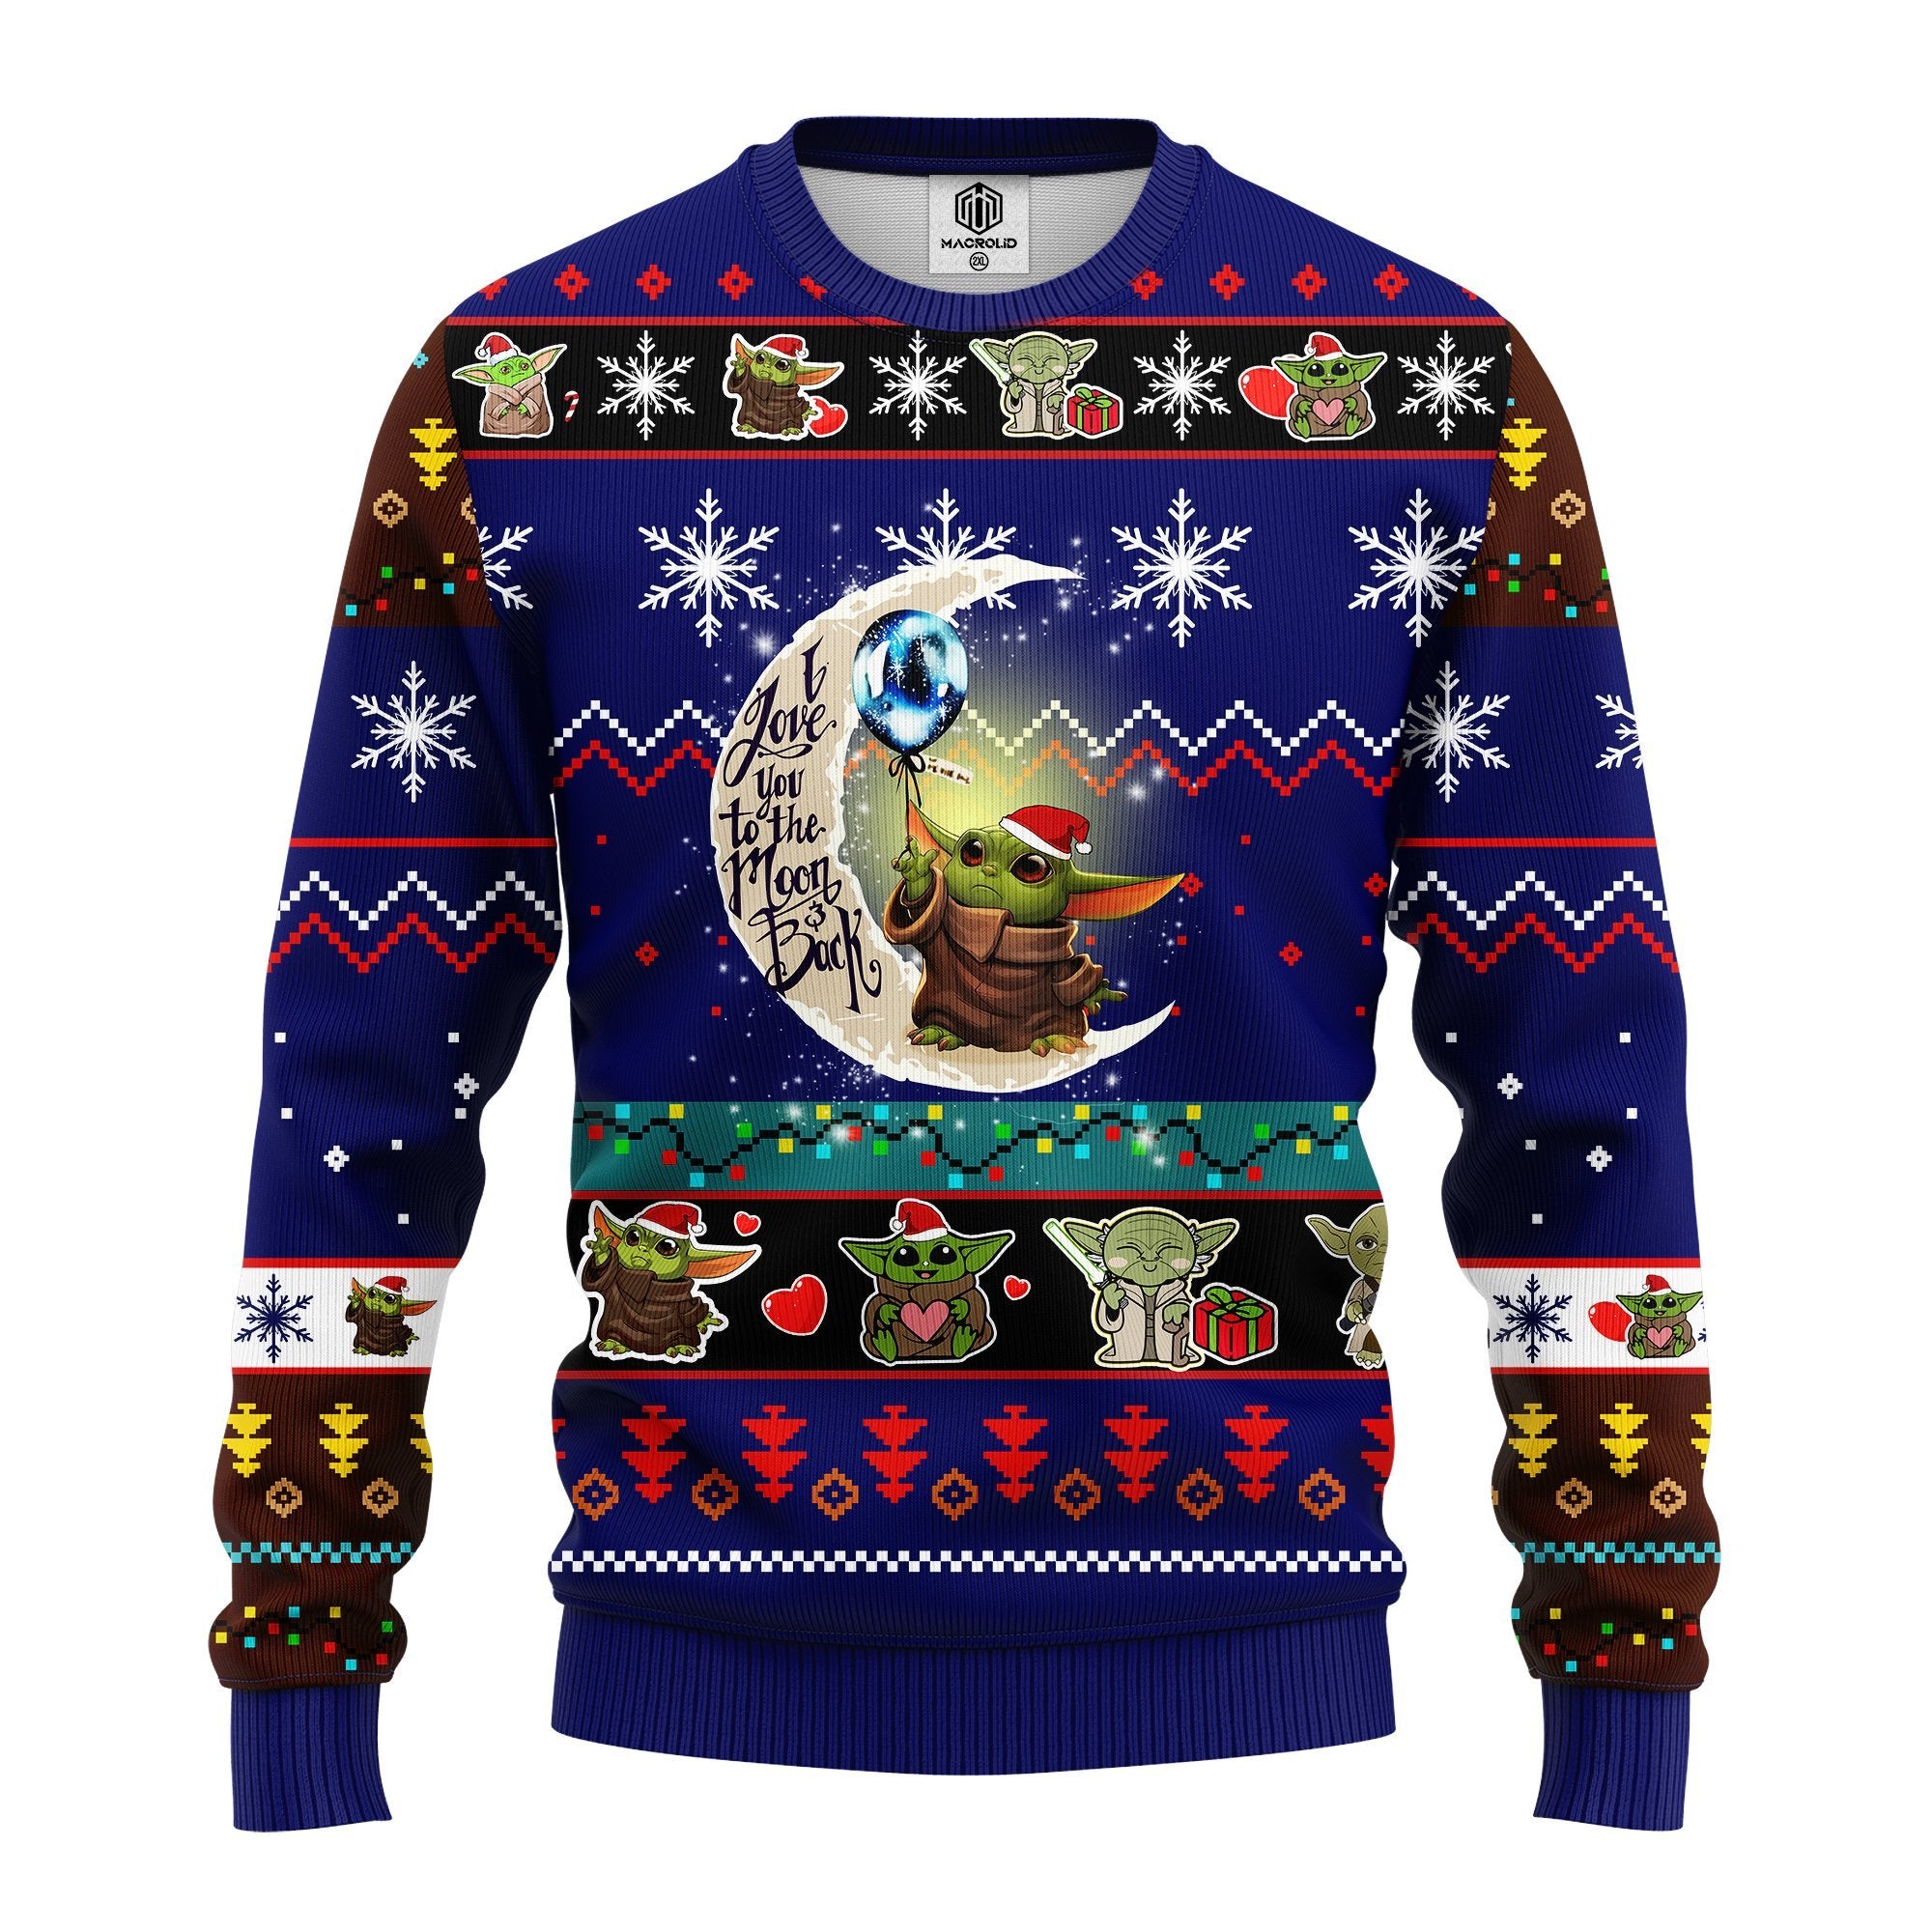 Star Wars Baby Yoda Cute Ugly Christmas Sweater Blue 1 Amazing Gift Idea Thanksgiving Gift